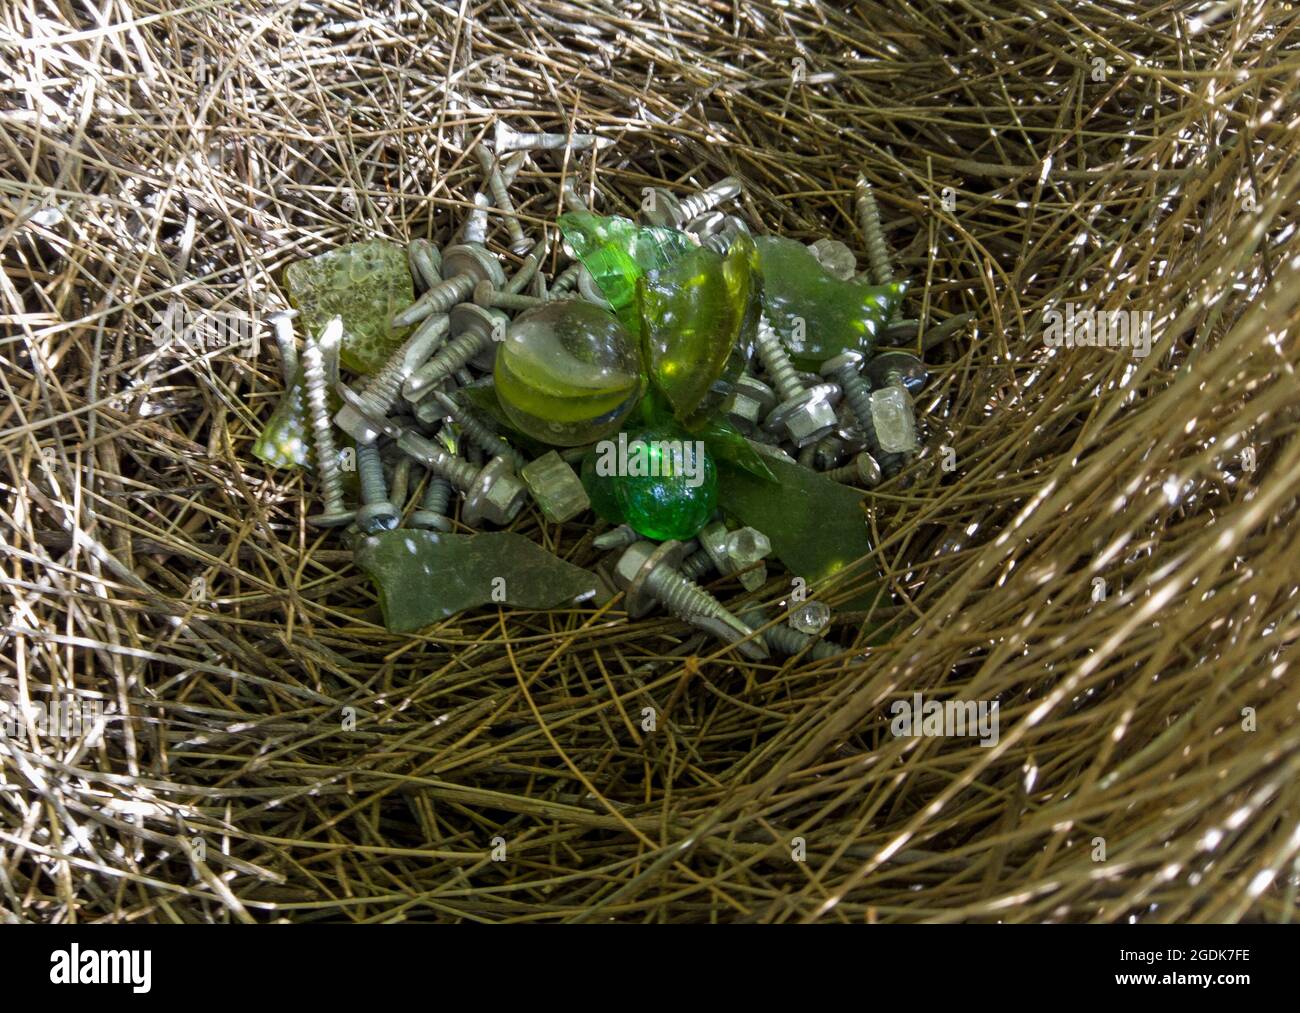 Spotted bowerbird collection of glass and nuts and bolts for the bower. Stock Photo